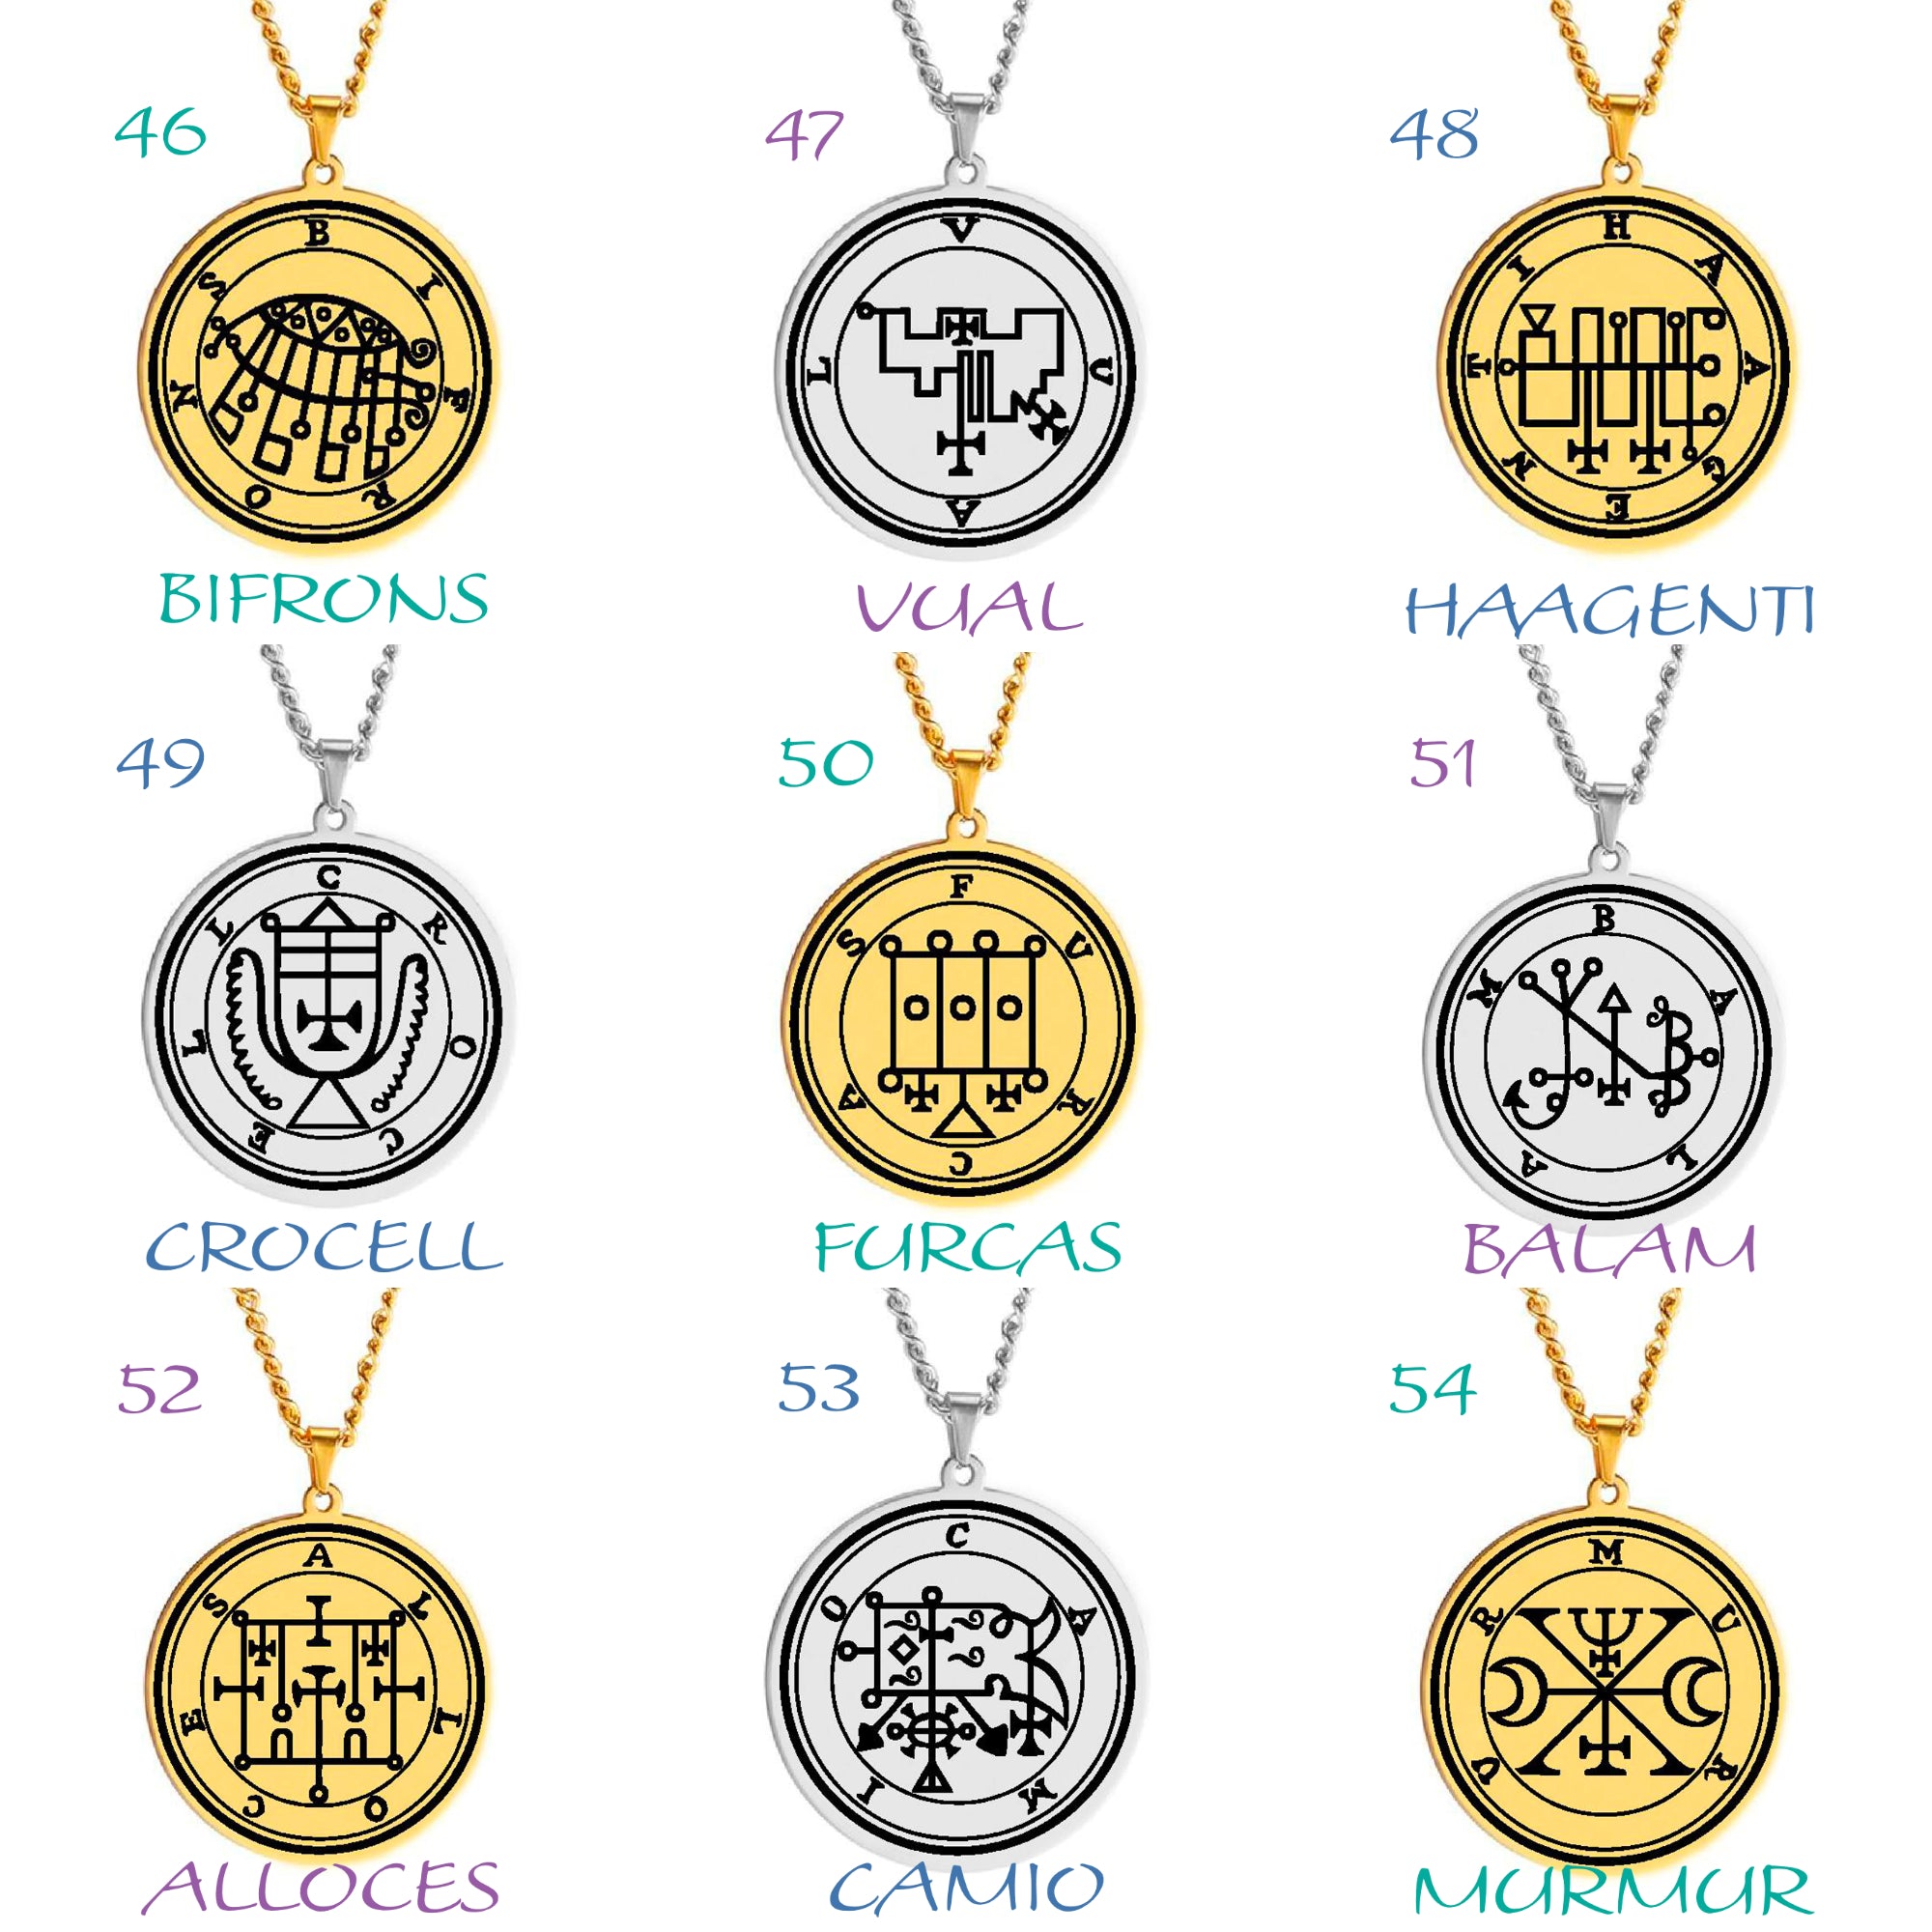 Gold Pendant Necklace With Seals Of The 72 Spirits In The Lesser Key of Solomon (Sigils 61-72) | Apollo Tarot Jewelry Shop